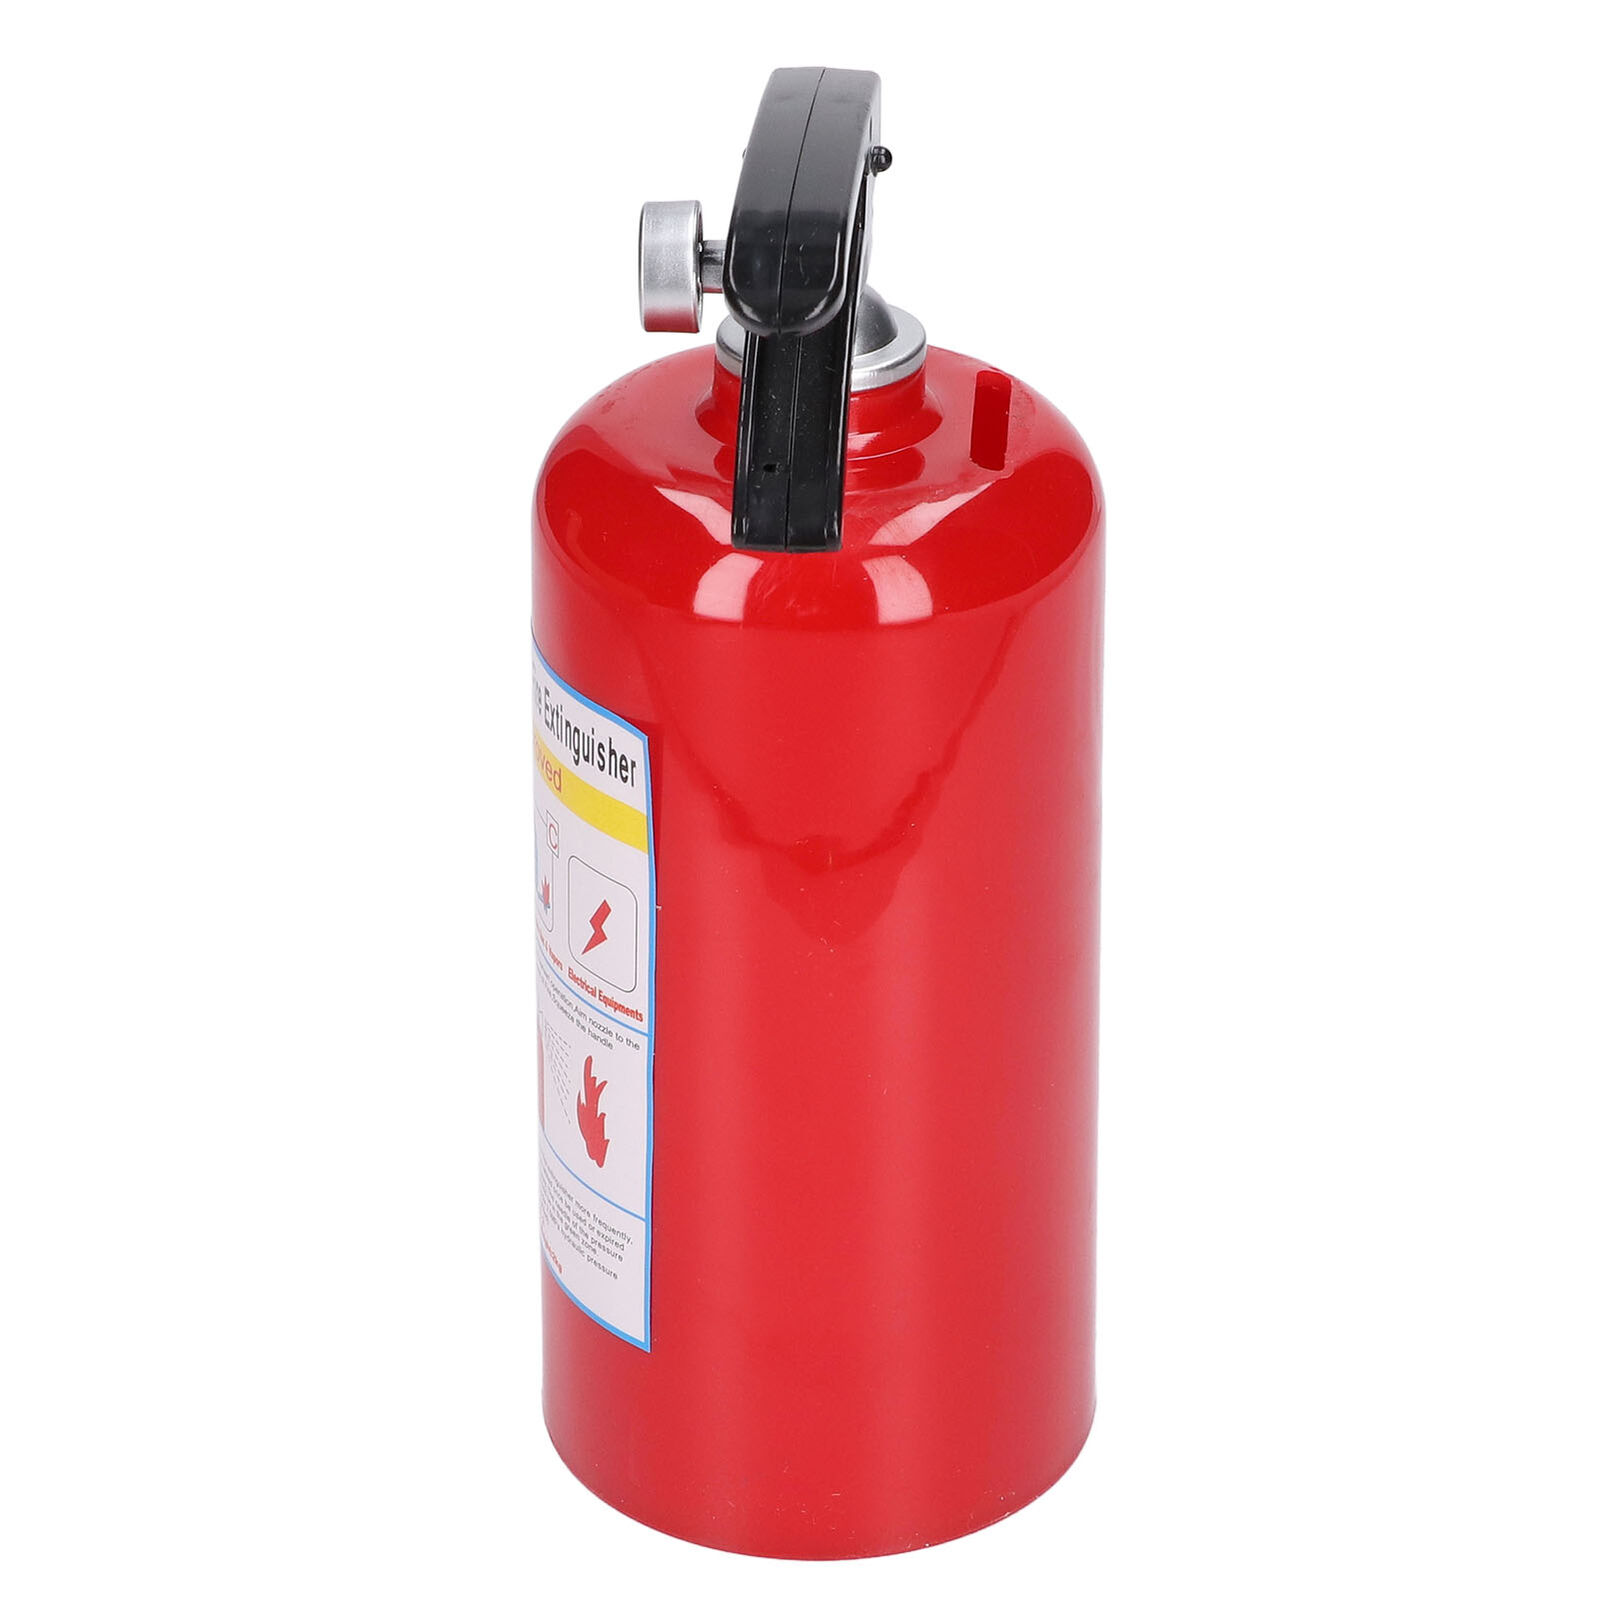 Saving Bank Simulation Fire Extinguishers Piggy Bank Large Capacity For Gifts